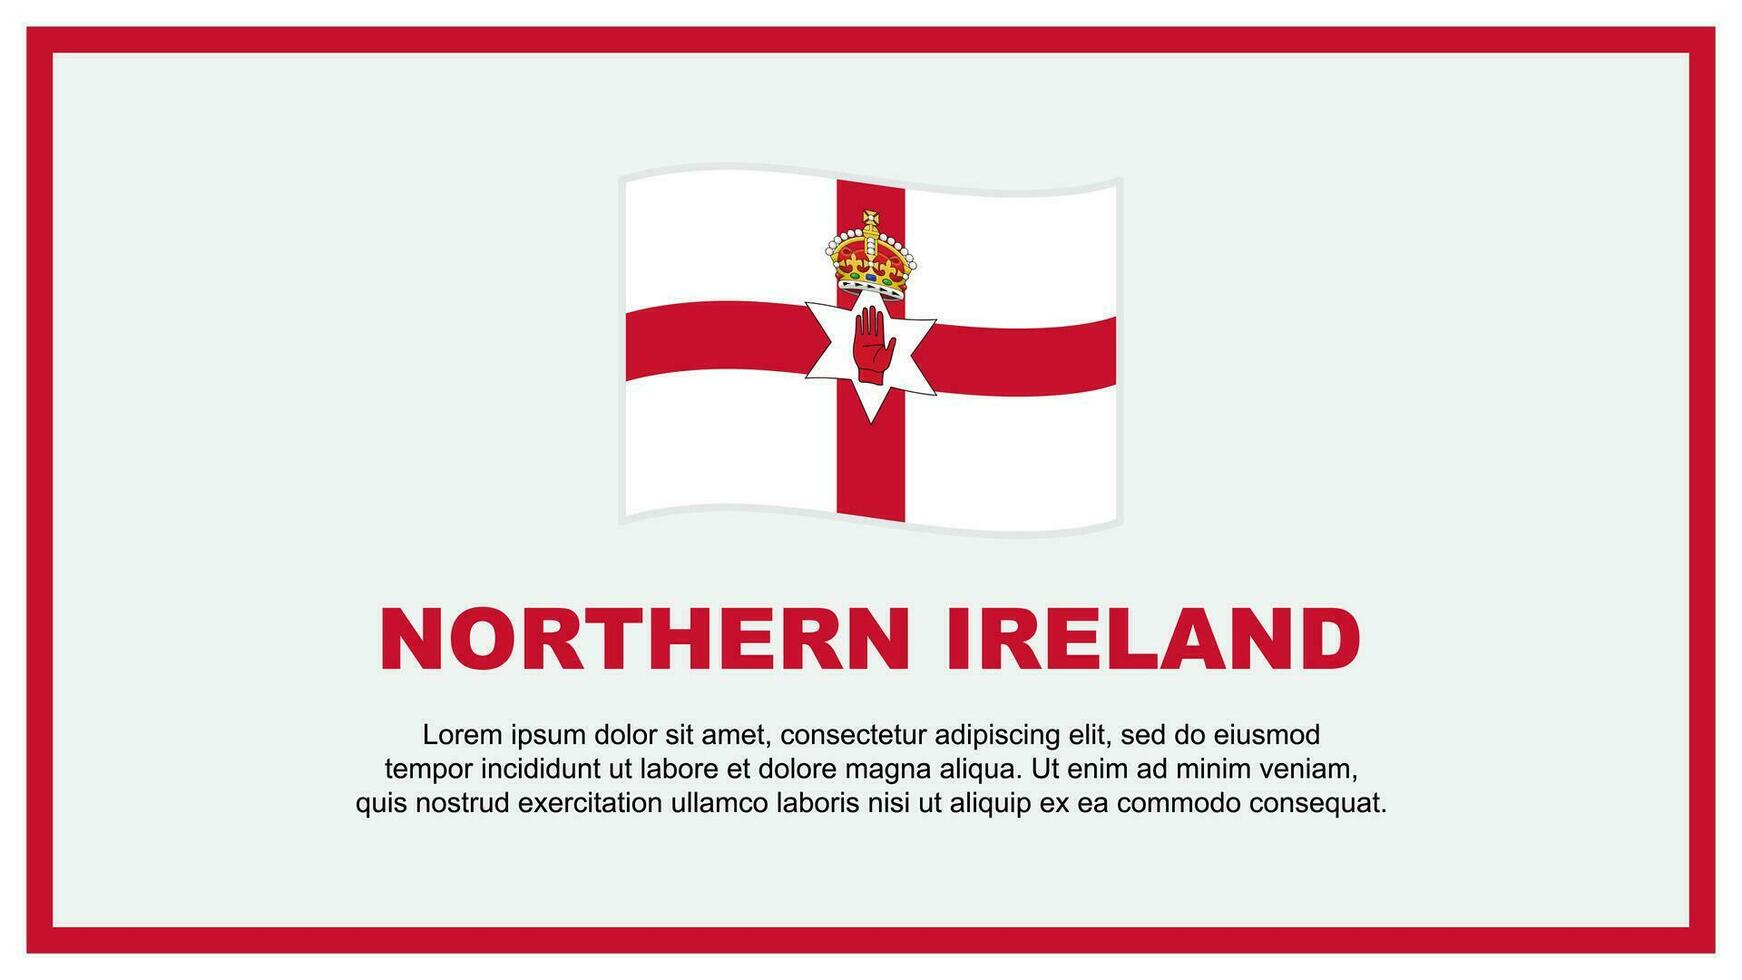 Northern Ireland Flag Abstract Background Design Template. Northern Ireland Independence Day Banner Social Media Vector Illustration. Northern Ireland Banner